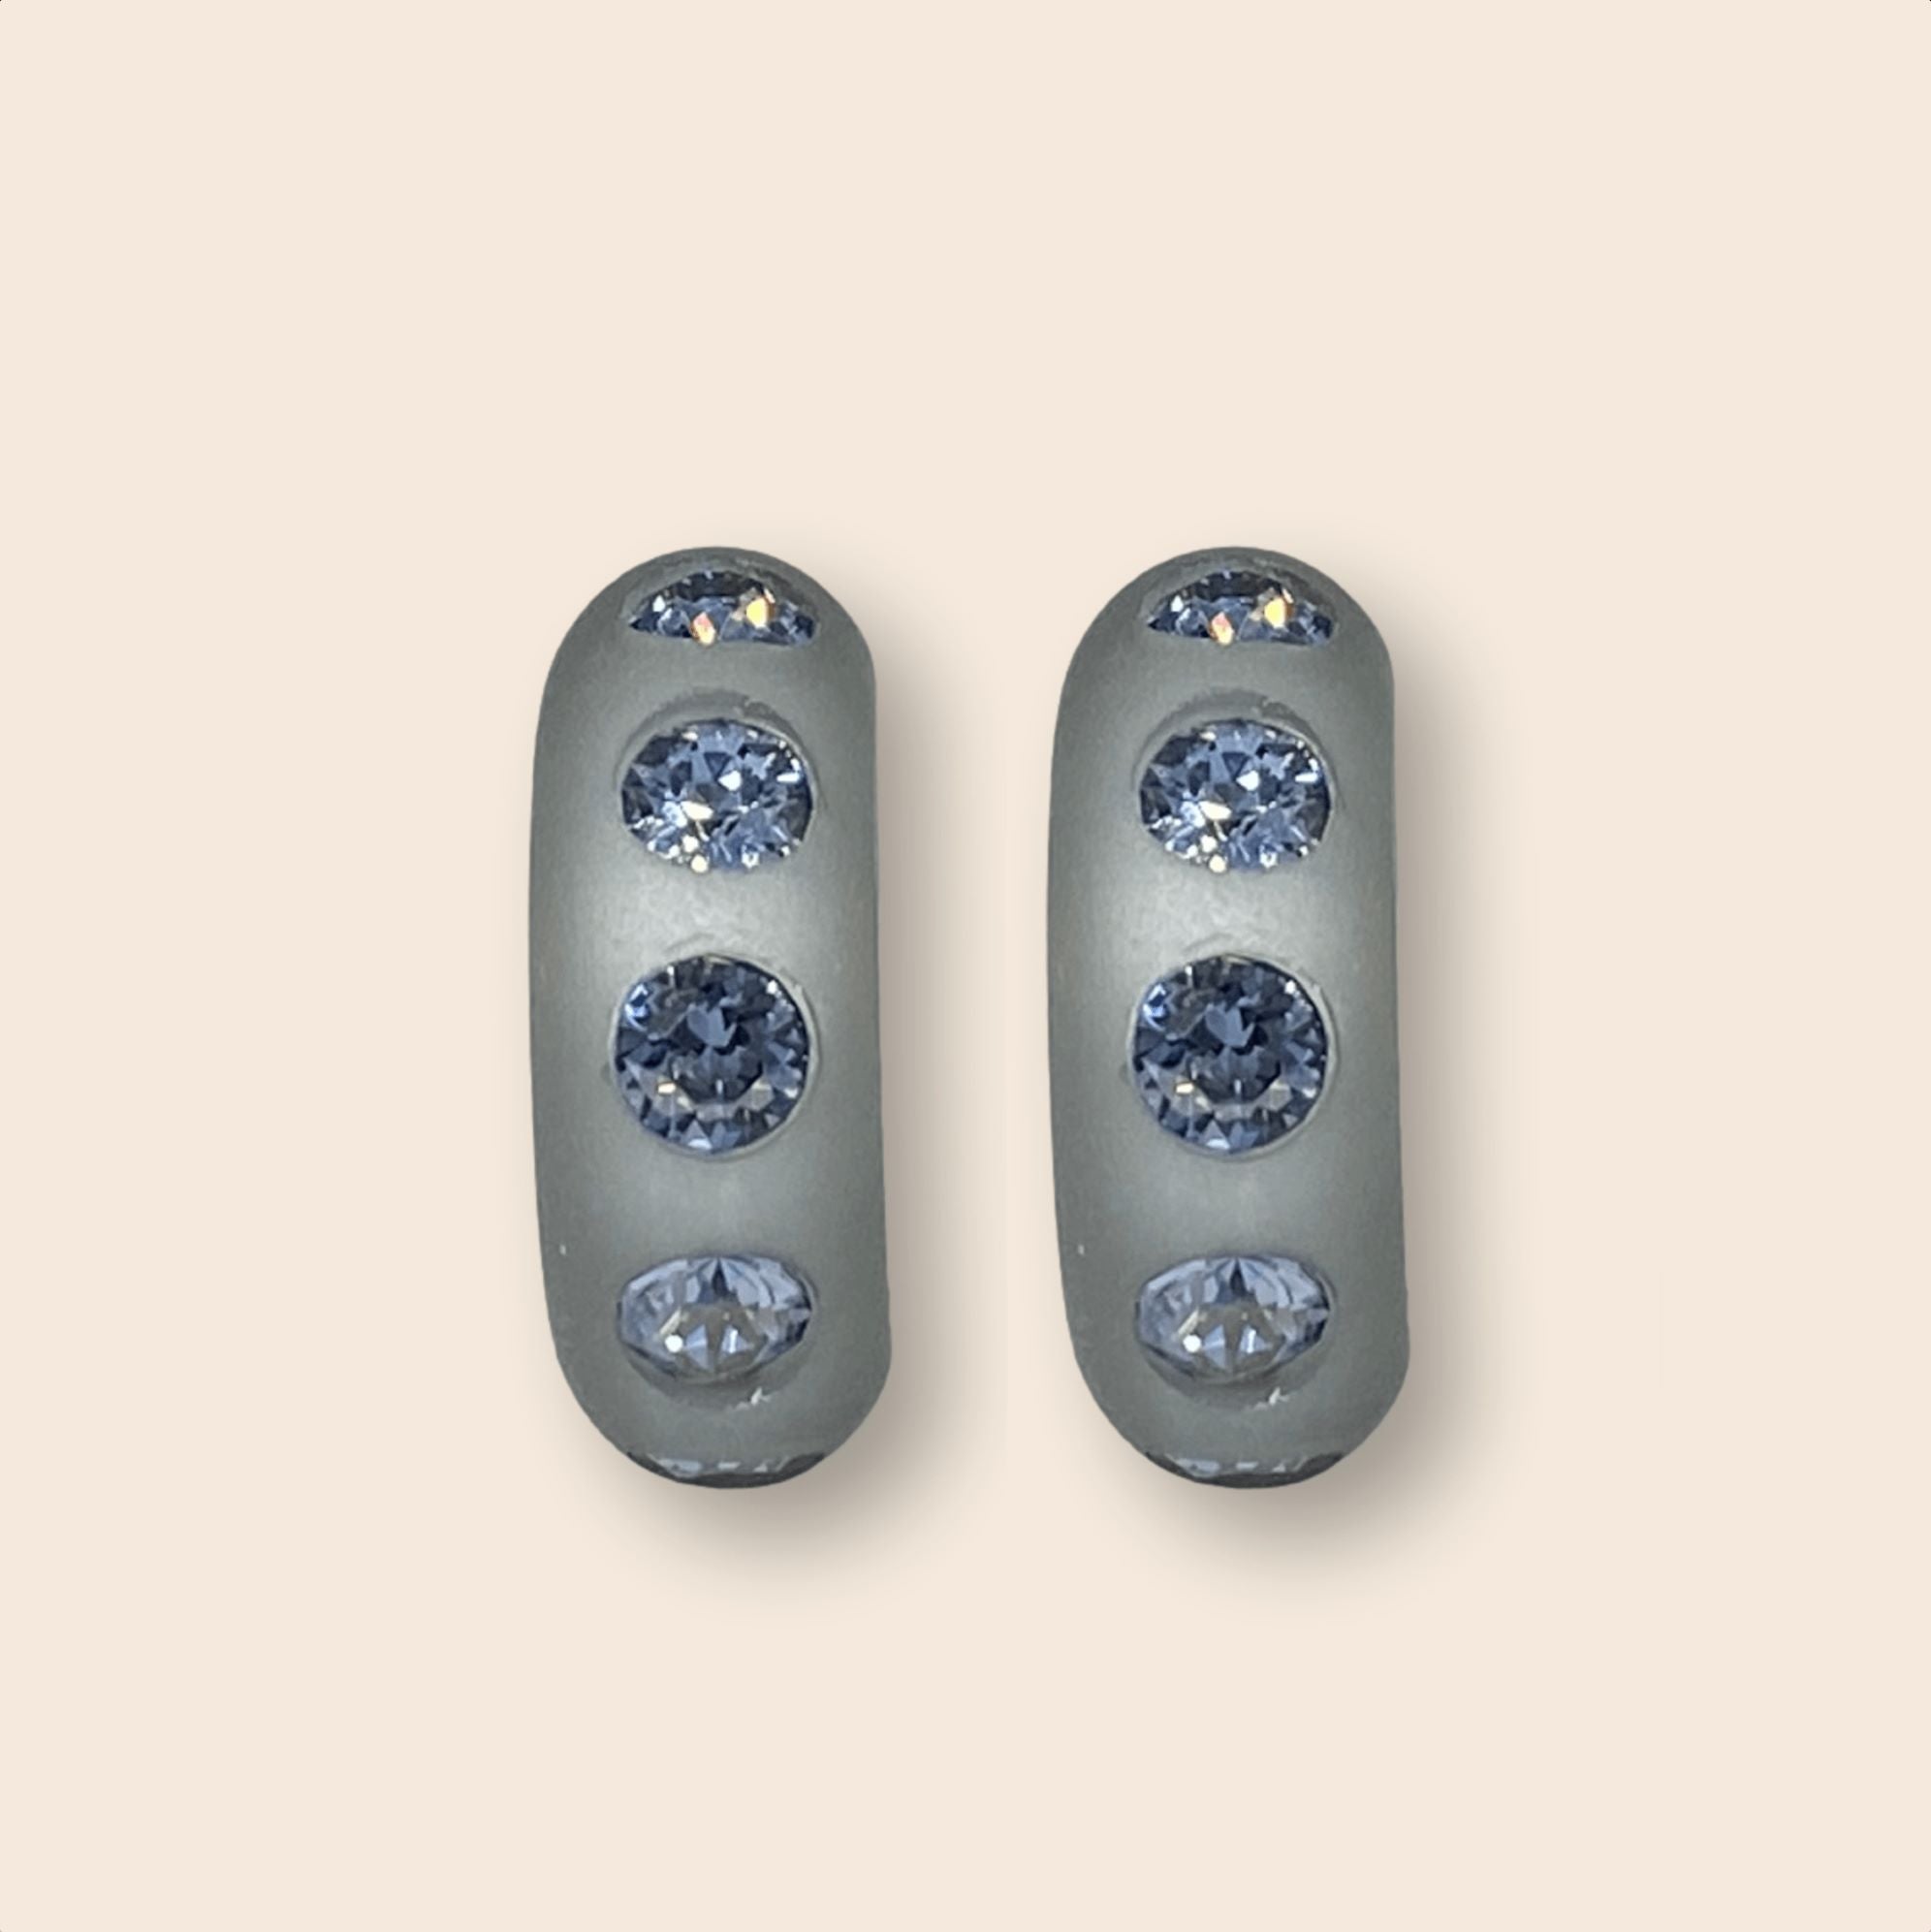 Kleine Coloristers Creolen Bari mit Kristallen in  grau. Small Coloristers creole earrings Bari with crystals in grey.